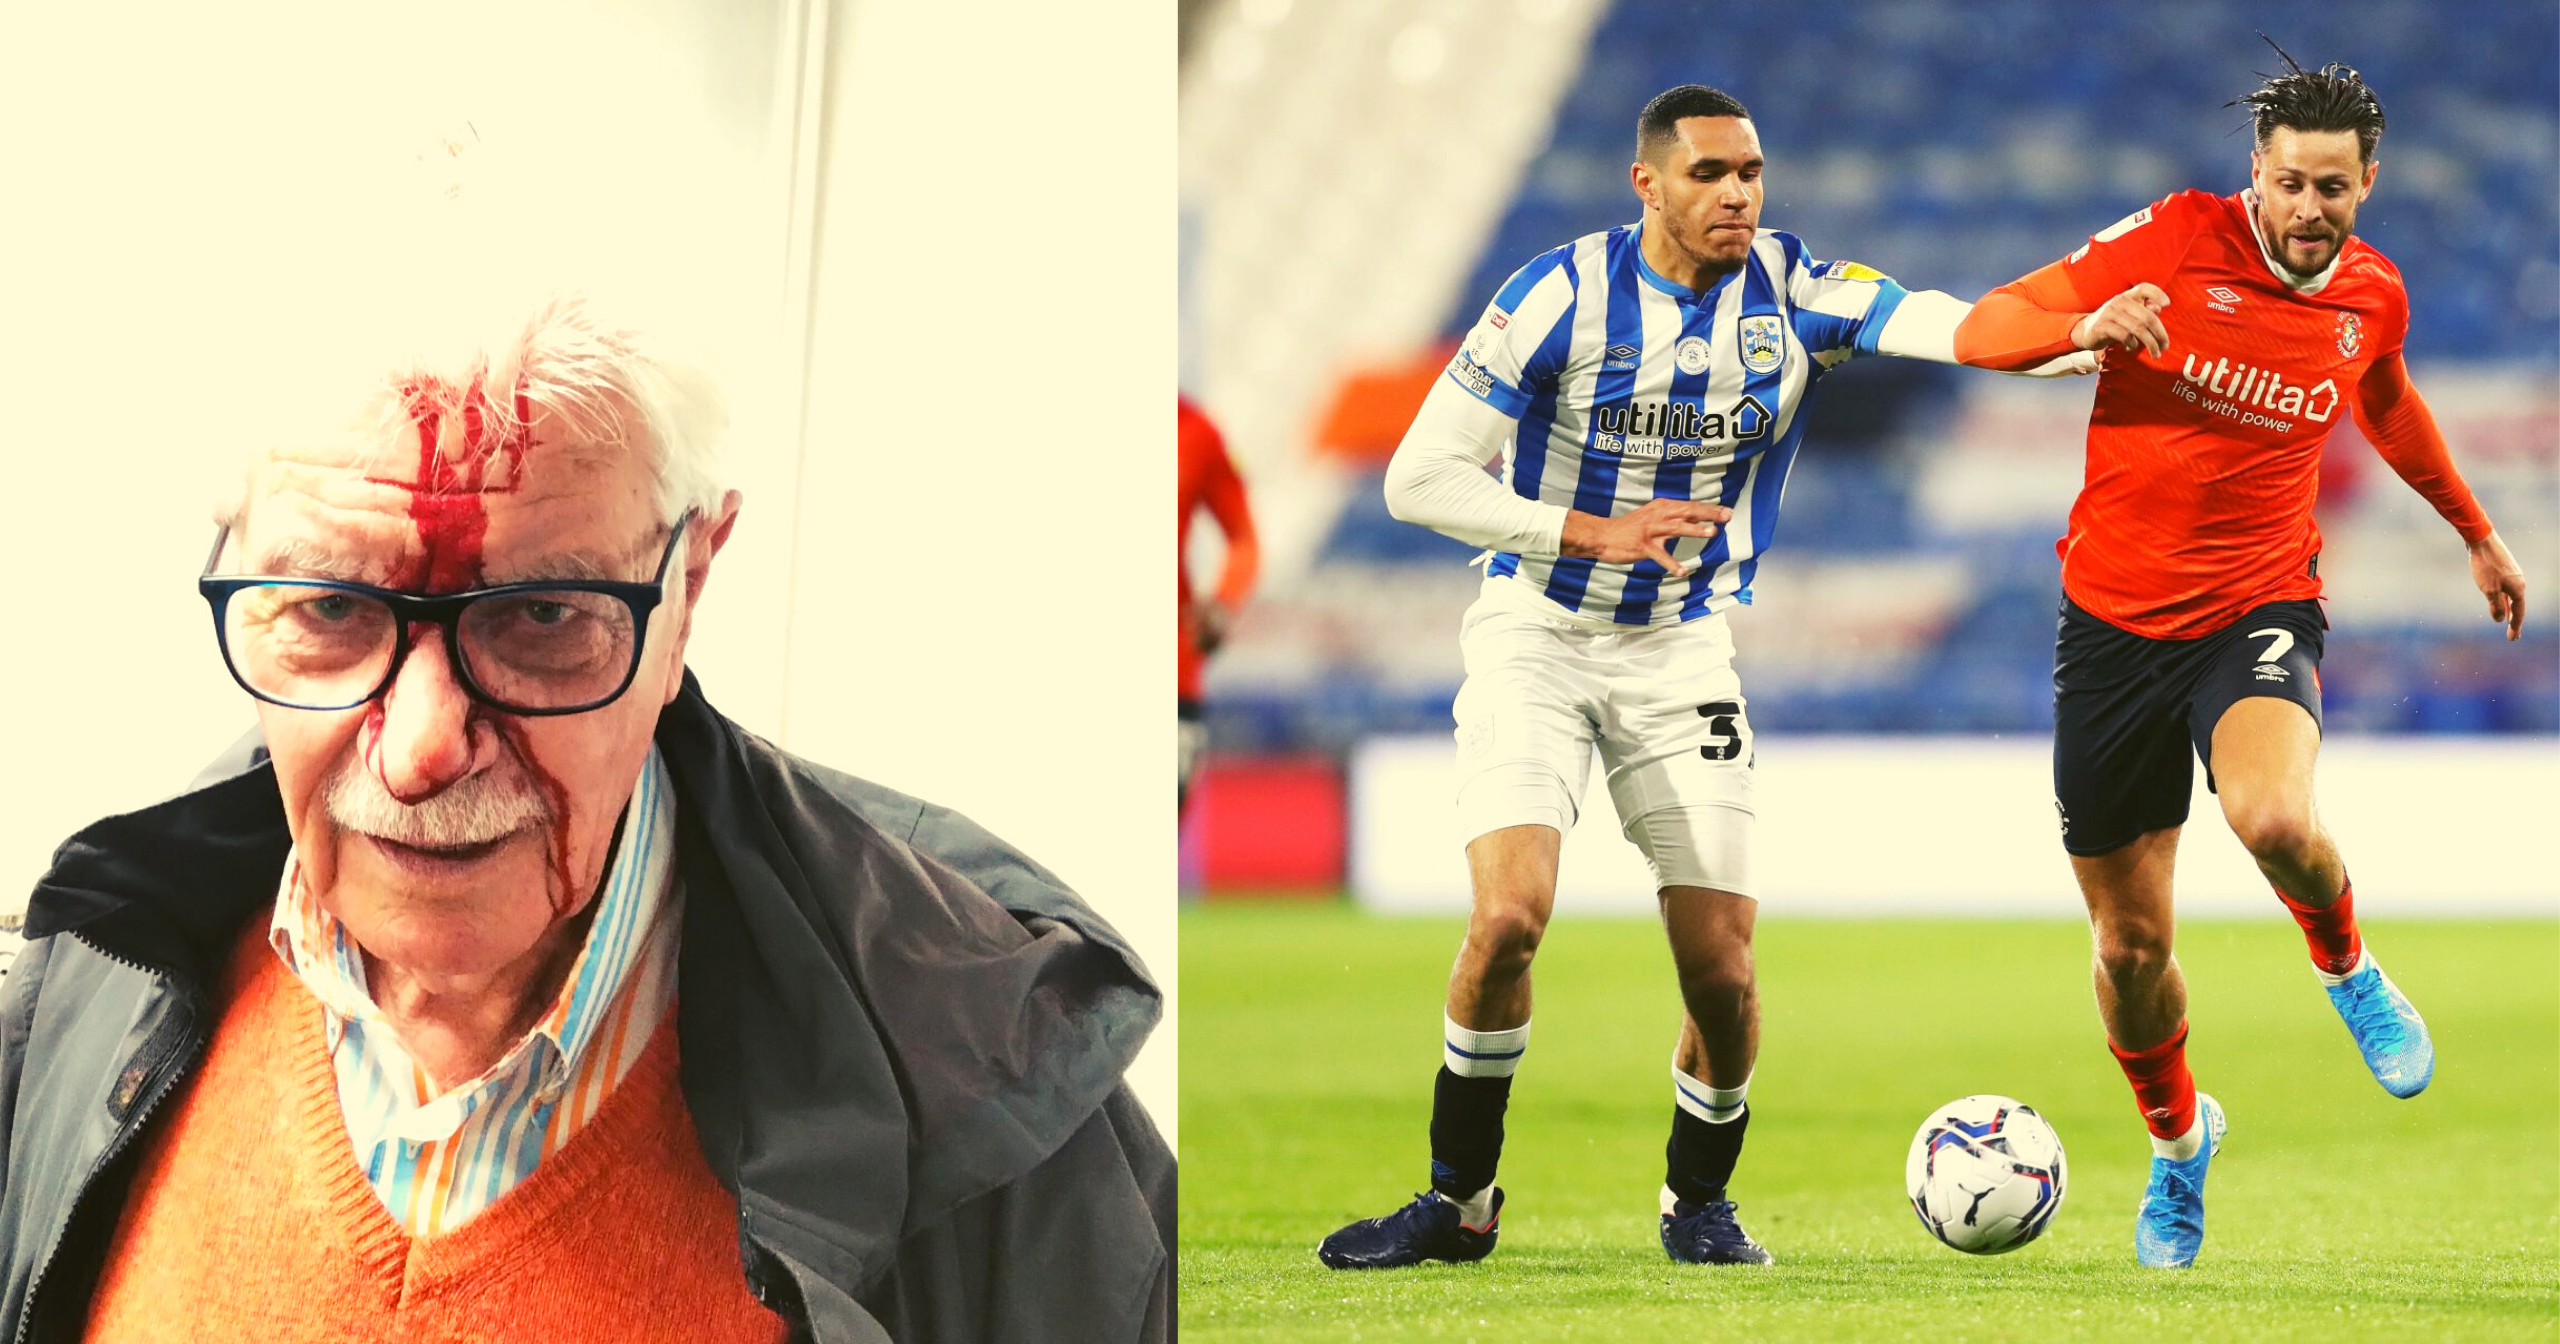 Luton Town Fan Shares A Picture Of His Grandfather Hit By Huddersfield Fan